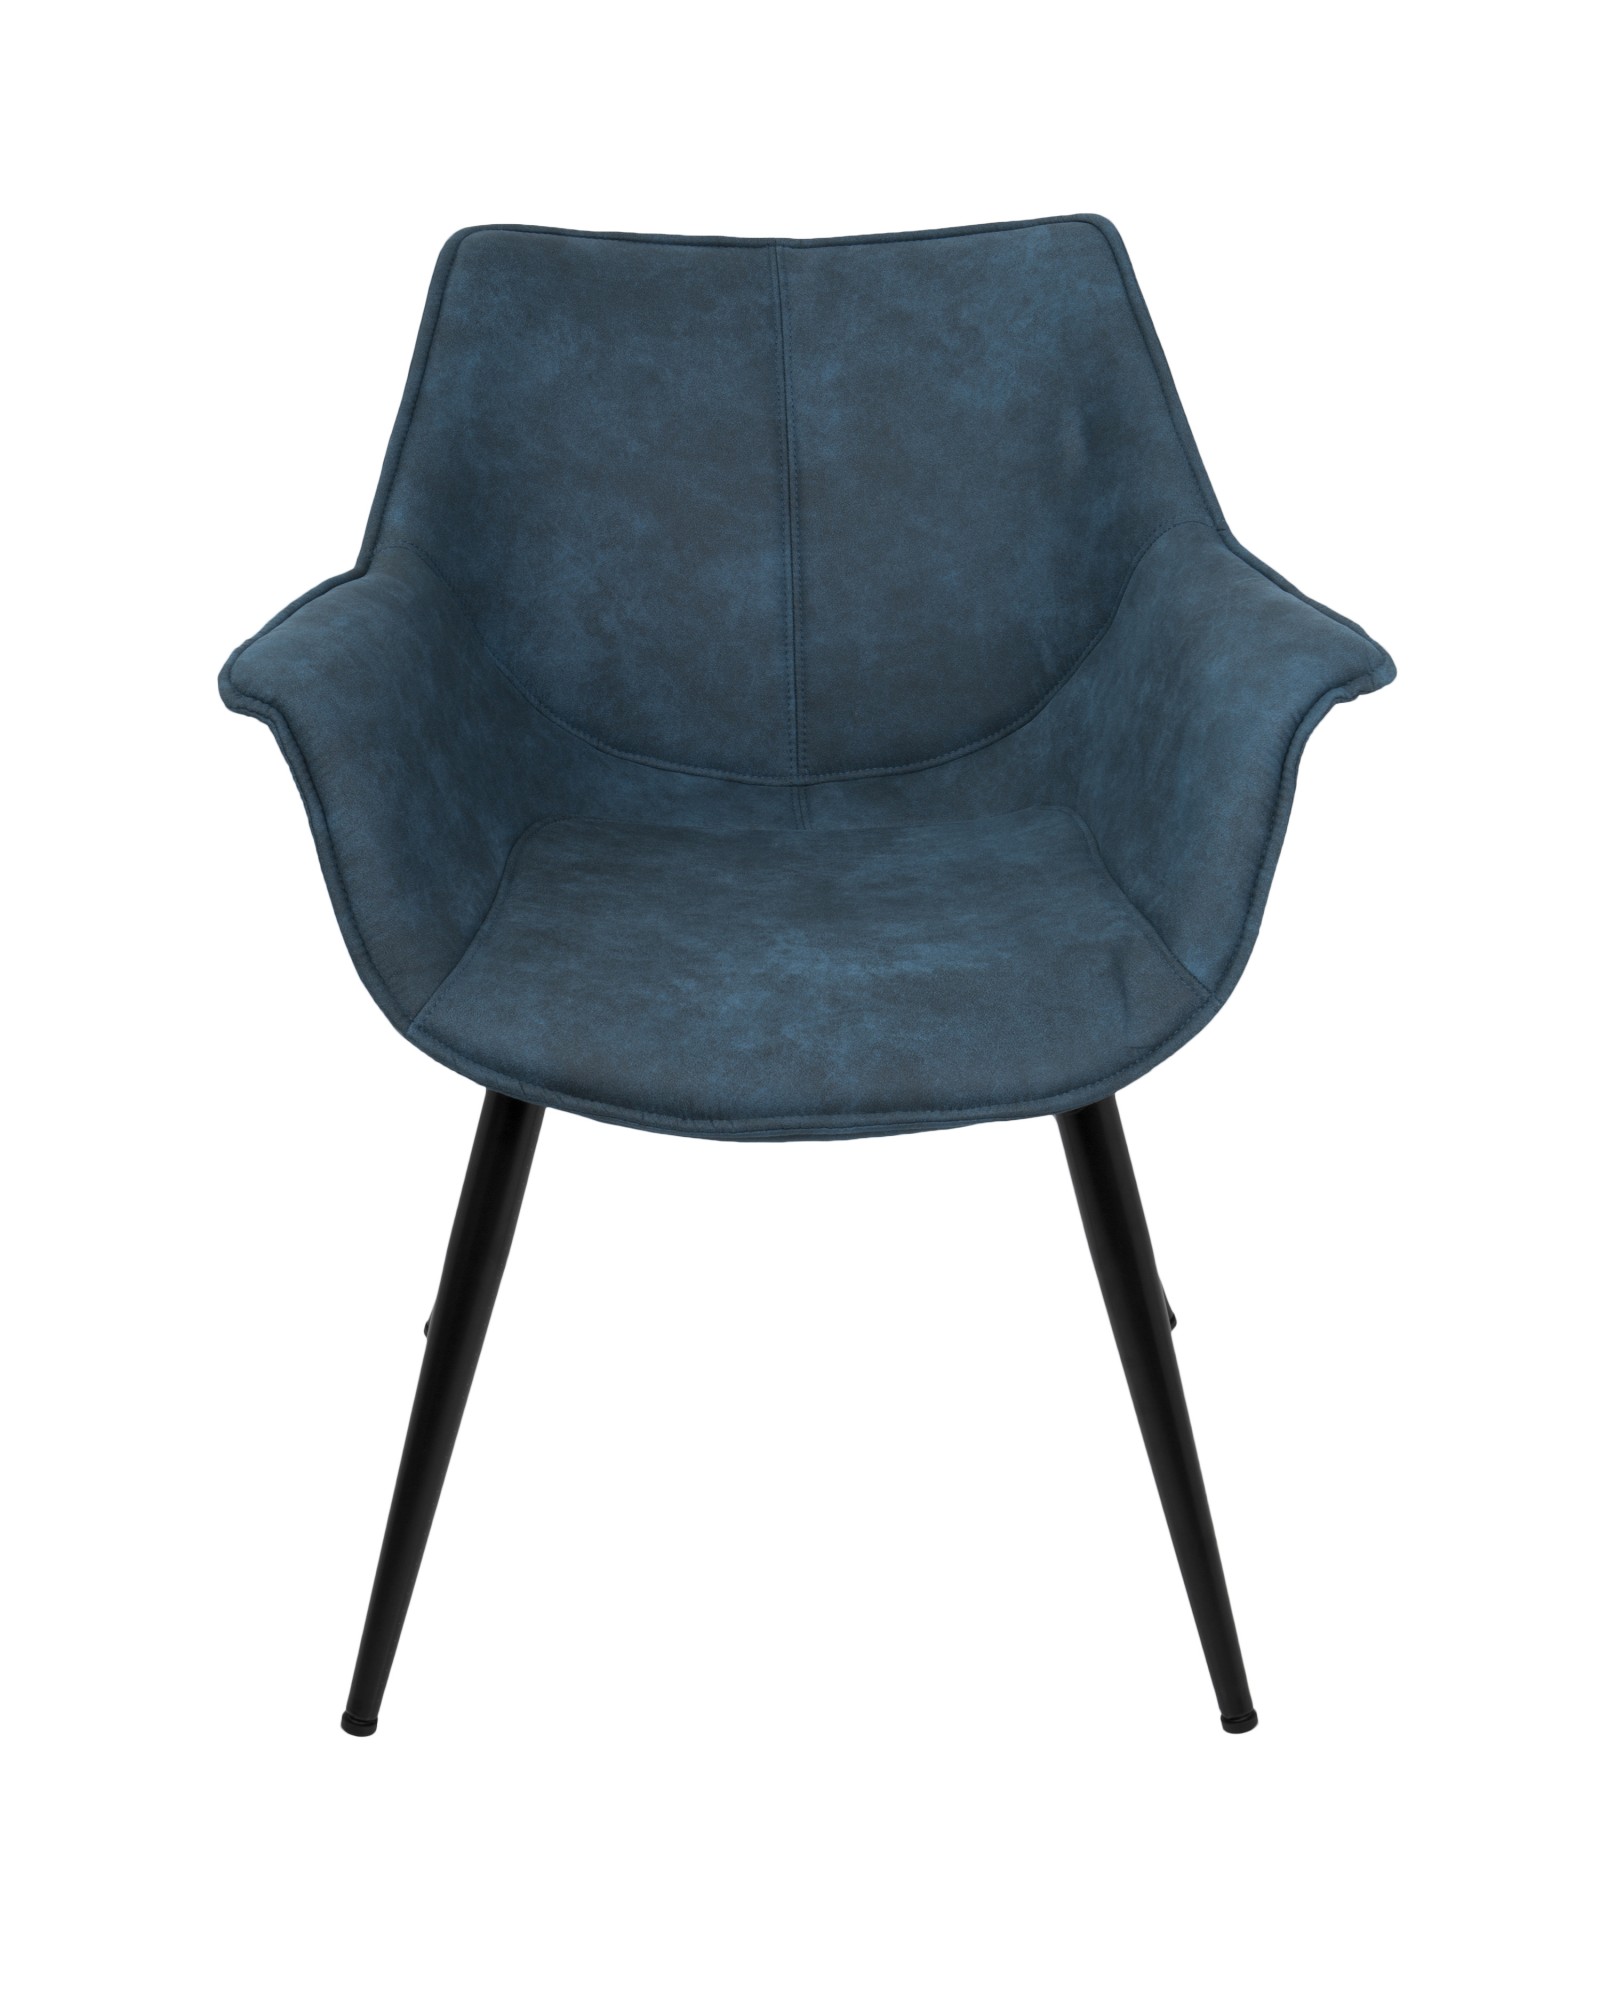 Wrangler Contemporary Accent Chair in Blue - Set of 2